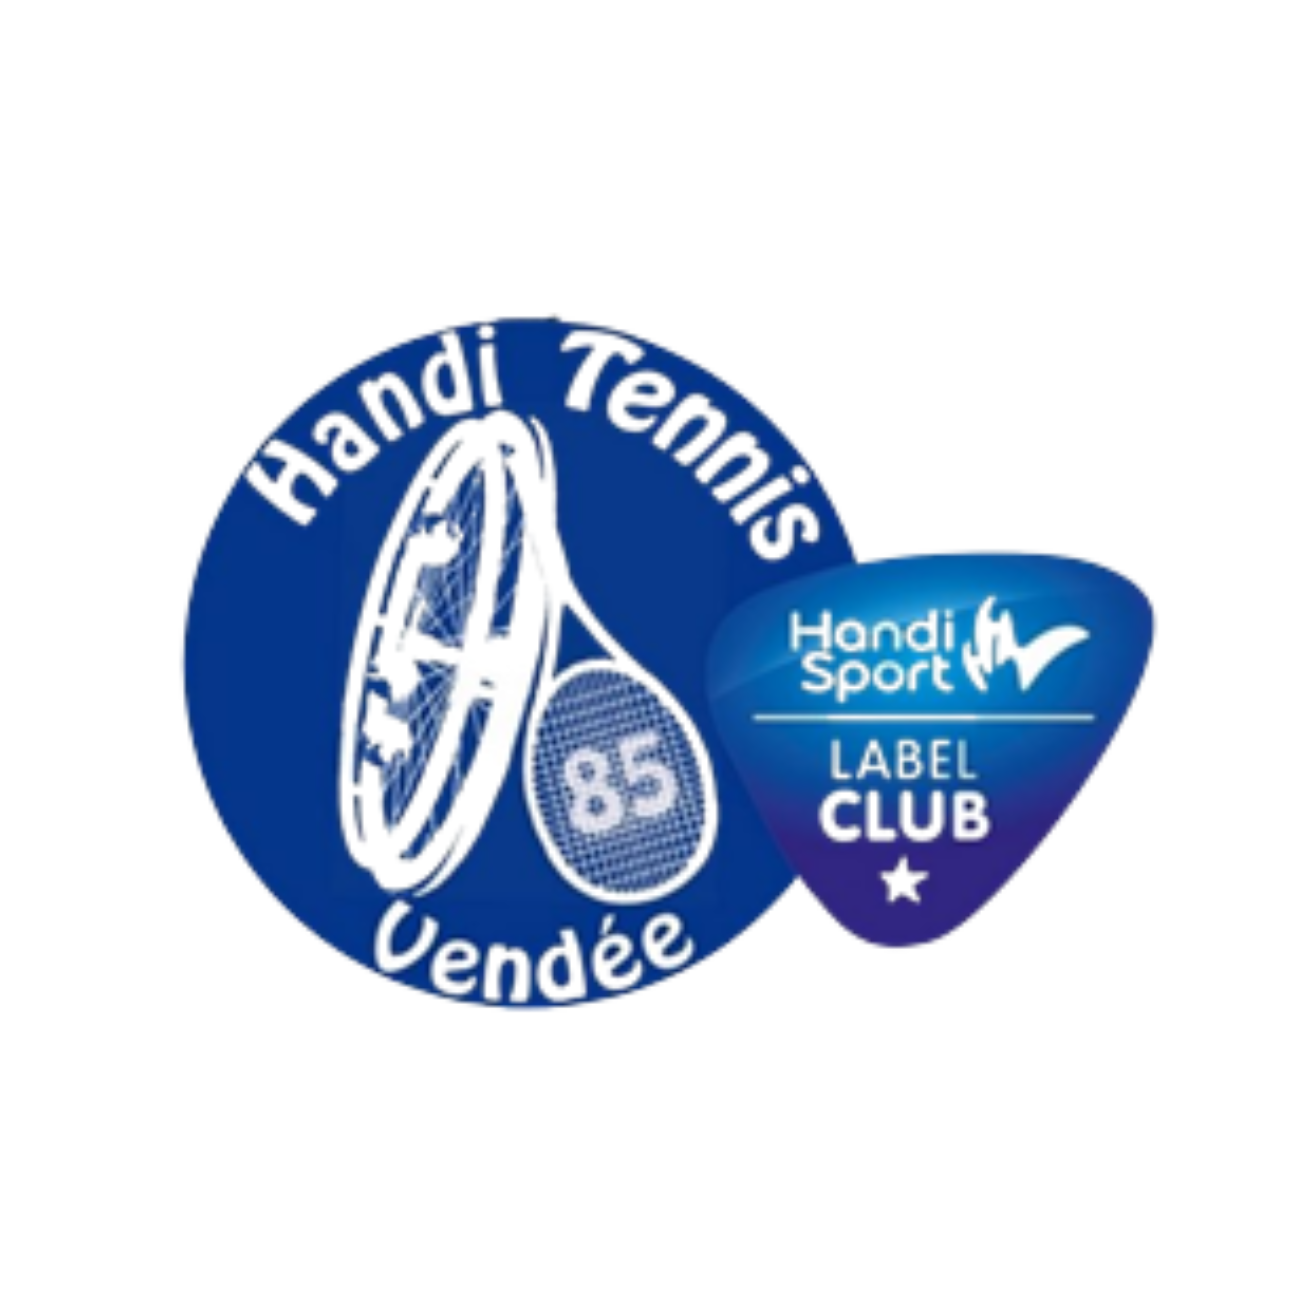 You are currently viewing Handi Tennis Vendée